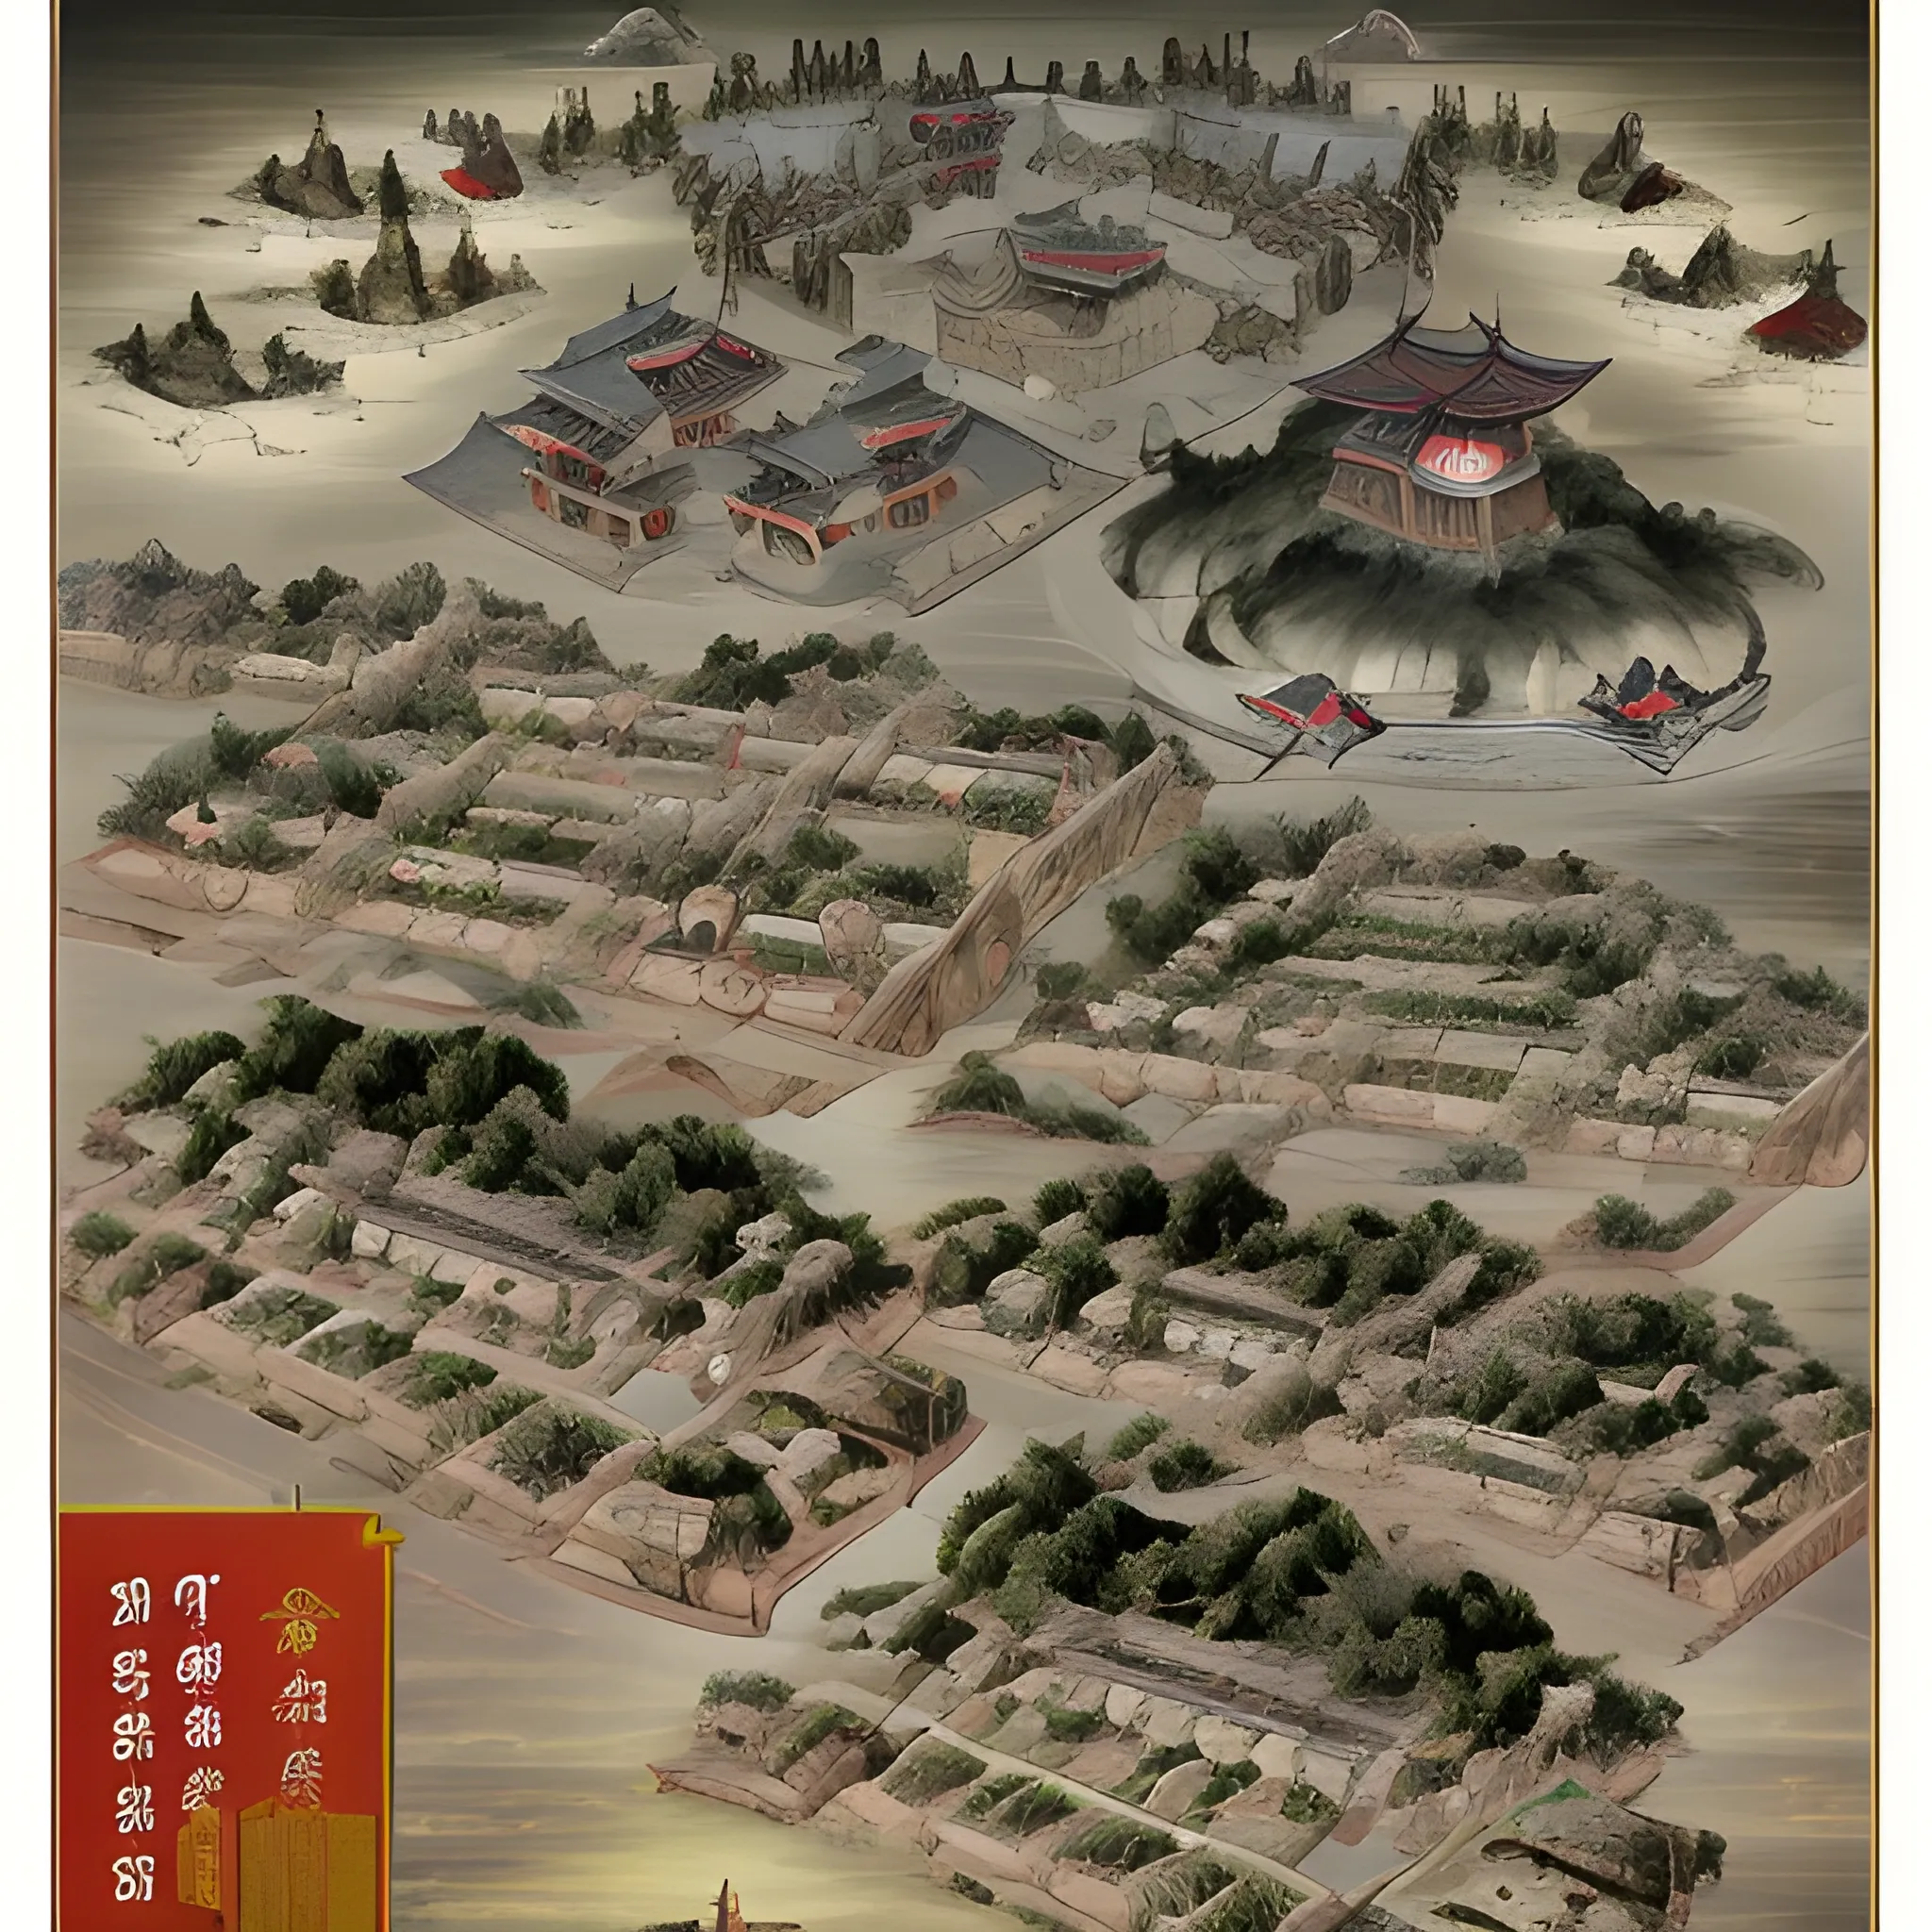 The disaster of Jingkang, also known as the shame of Jingkang, the change of Jingkang, the chaos of Jingkang, and the disaster of Jingkang, refers to the period from 1125 to 1127 A.D. when the Jurchen tribe from the north captured Bianliang, the capital of the Northern Song Dynasty (now Kaifeng City, Henan Province), and took them captive. The major wars and disasters of Emperor Song Qinzong, Supreme Emperor Song Huizong, Zhao Song royal family, concubines, officials and more than 100,000 capital civilians. The city was broken on November 25th, the first year of Jingkang (Bingwu Year) of Emperor Qinzong of Song Dynasty, hence the name. - Variations by @ryanbaba

, 3D